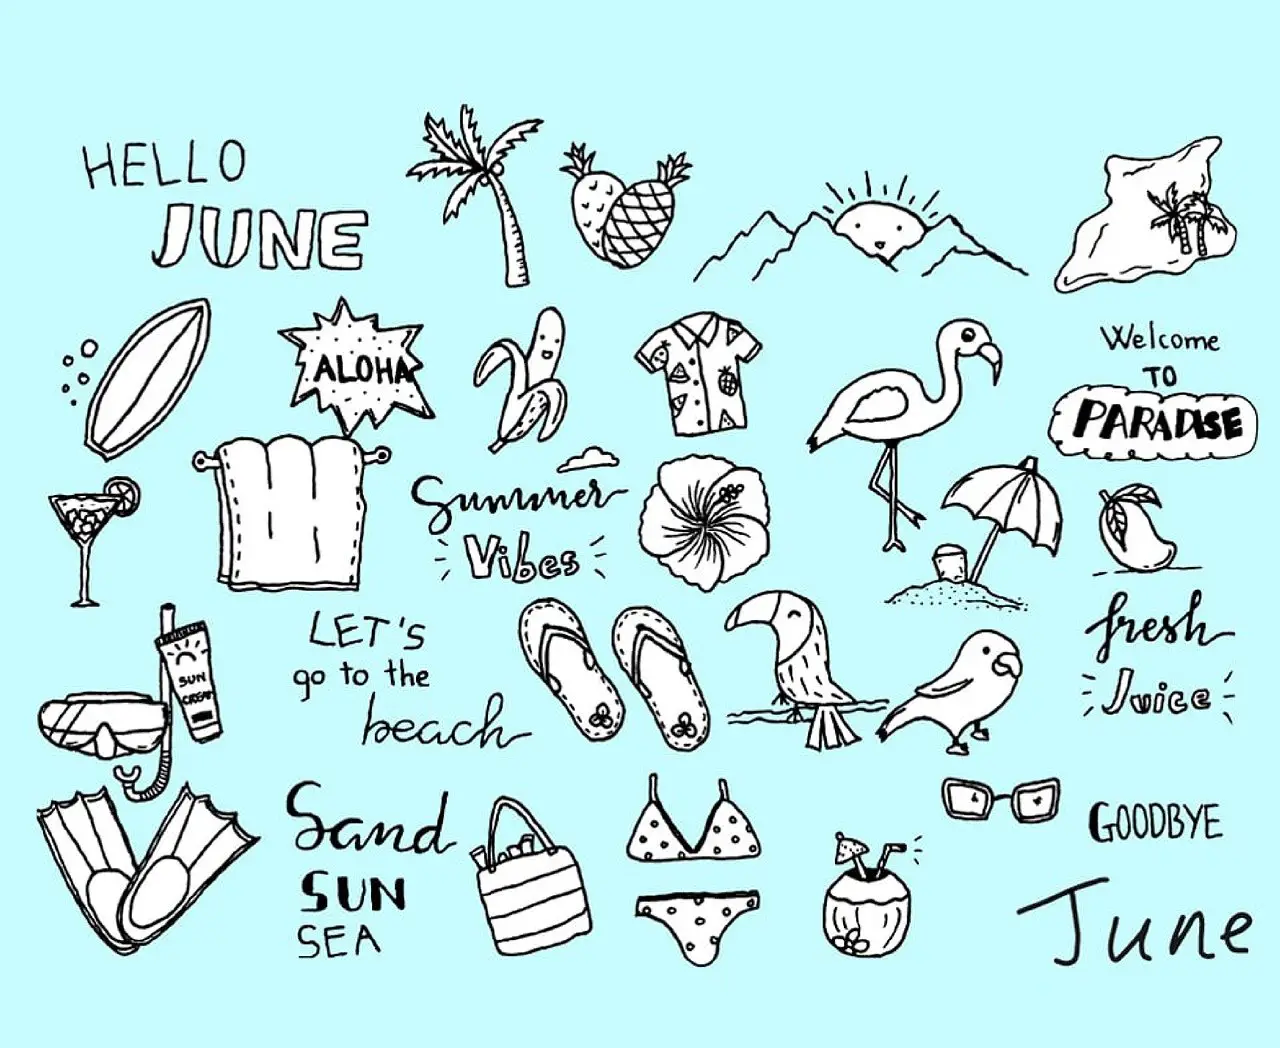 Top 30 June Quotes To Bring Summer Fun With Images